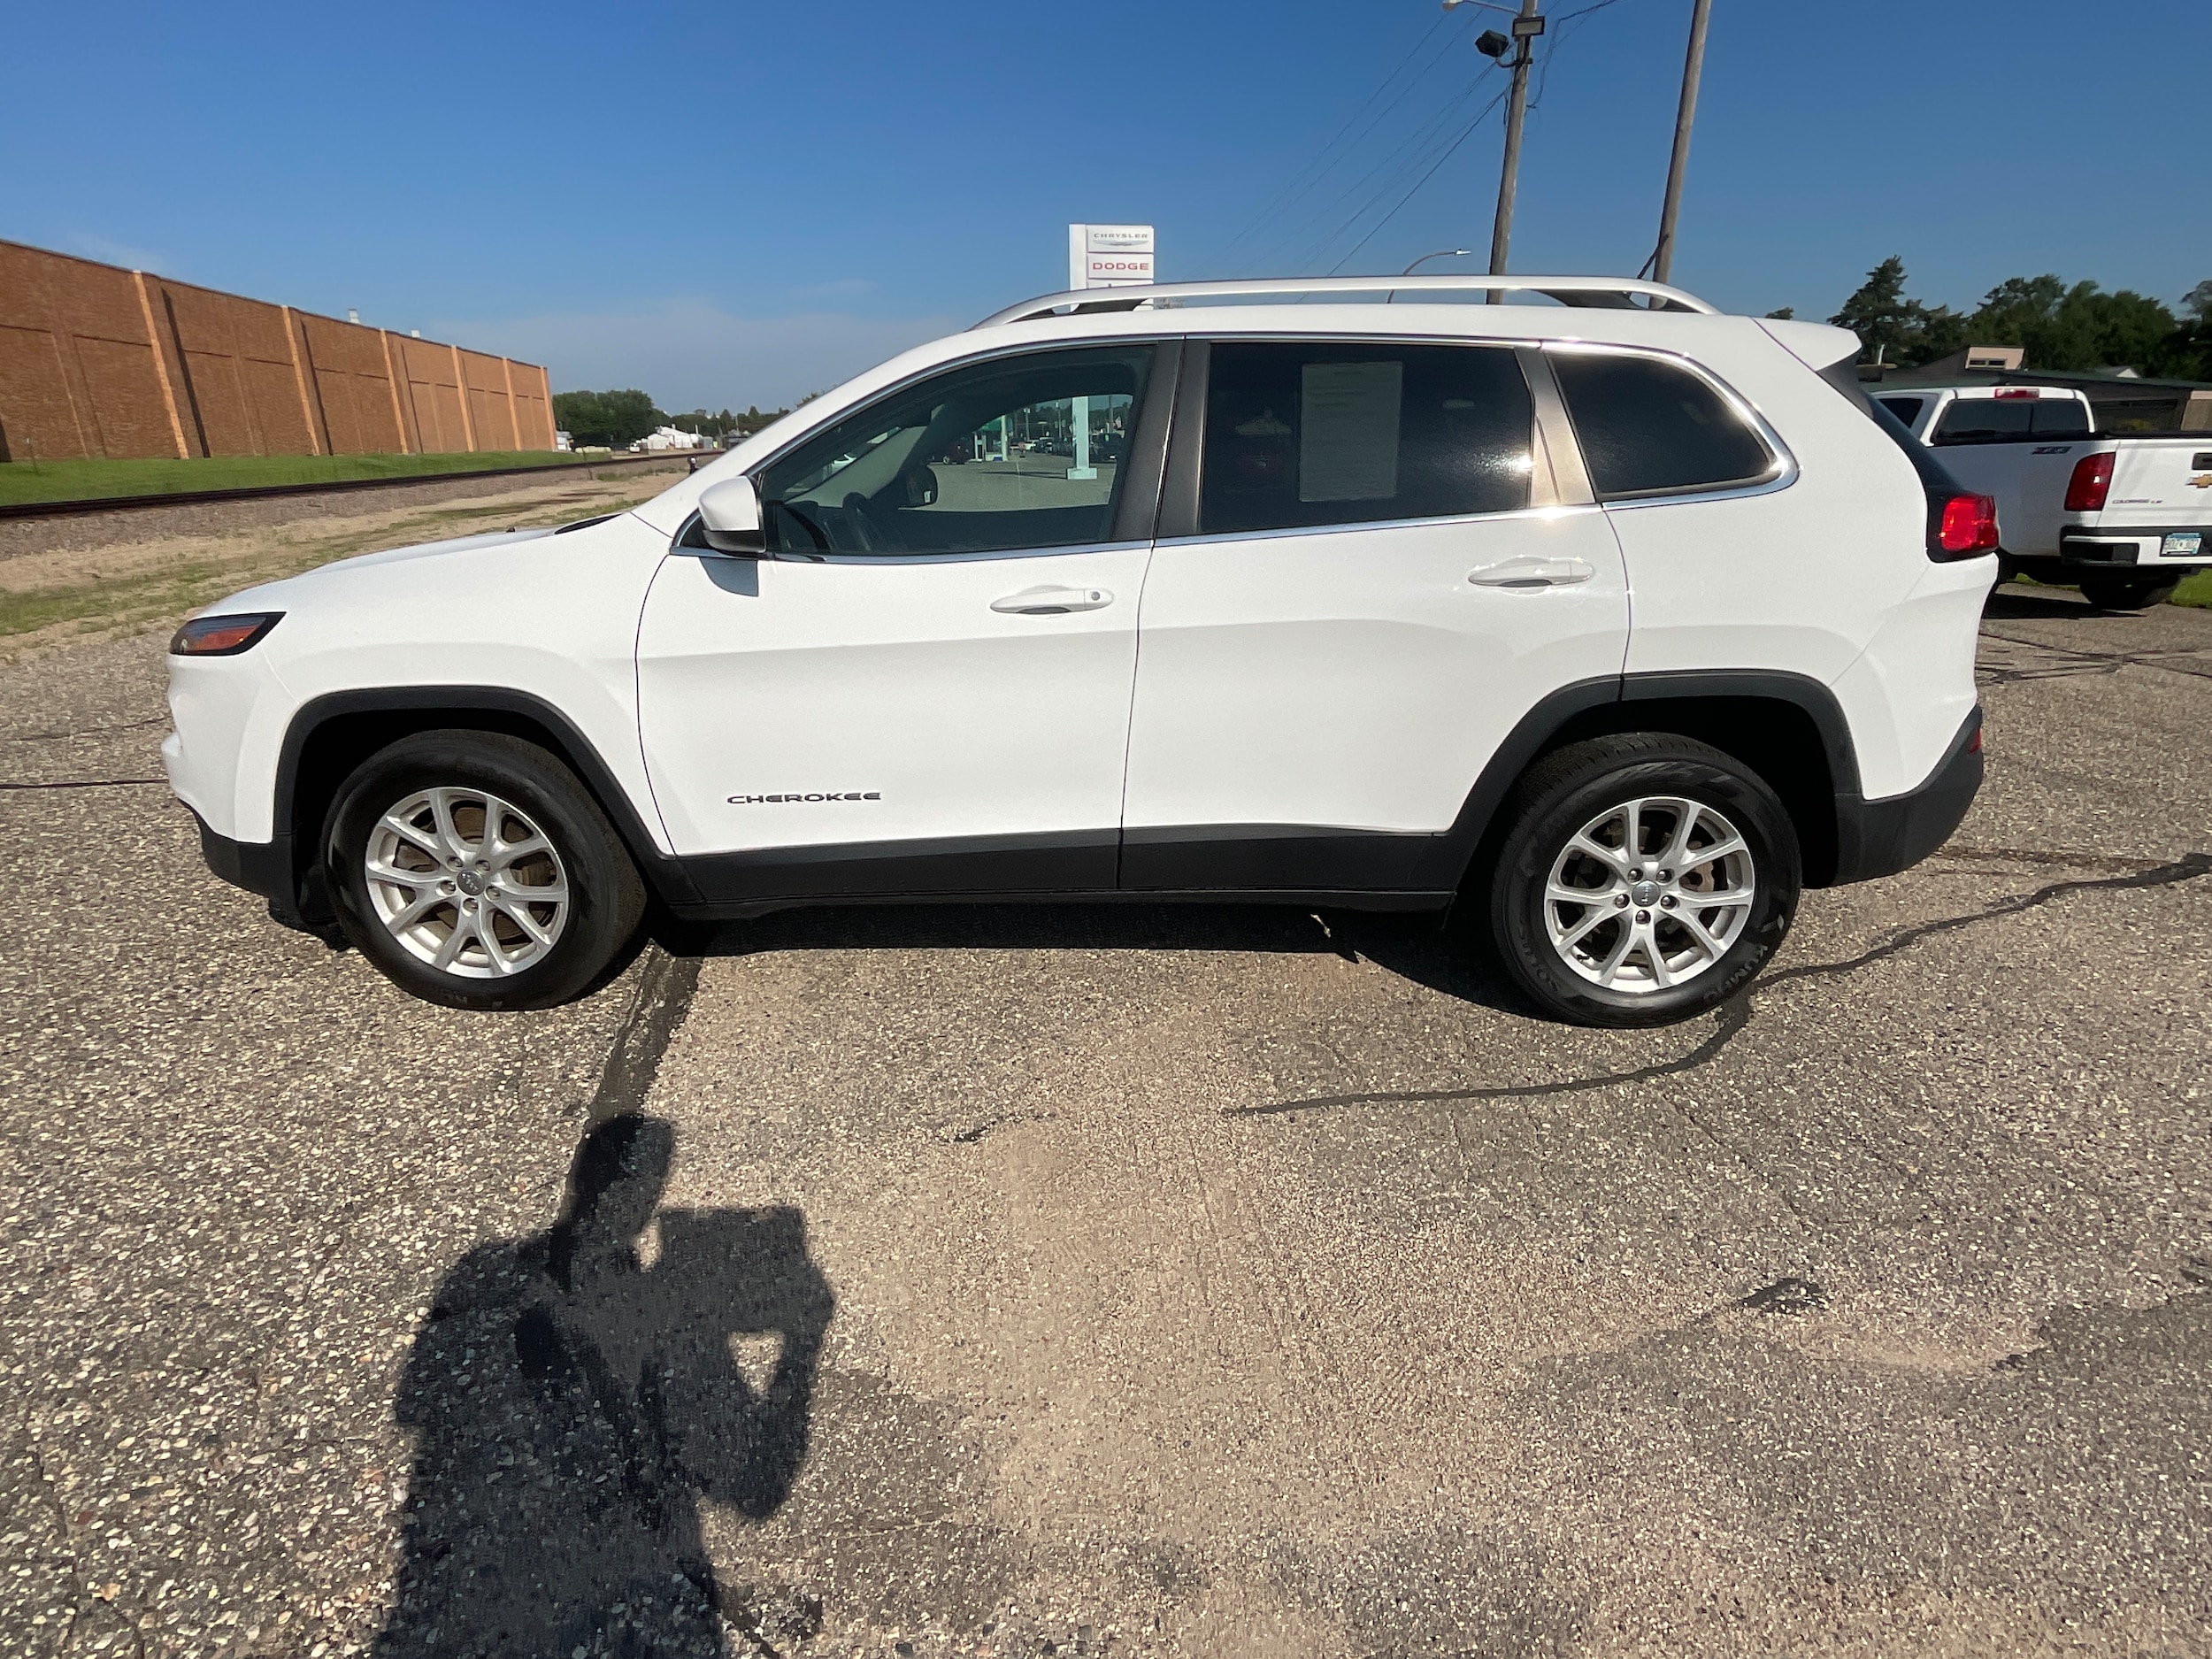 Used 2017 Jeep Cherokee Latitude with VIN 1C4PJLCB2HW603356 for sale in Litchfield, Minnesota